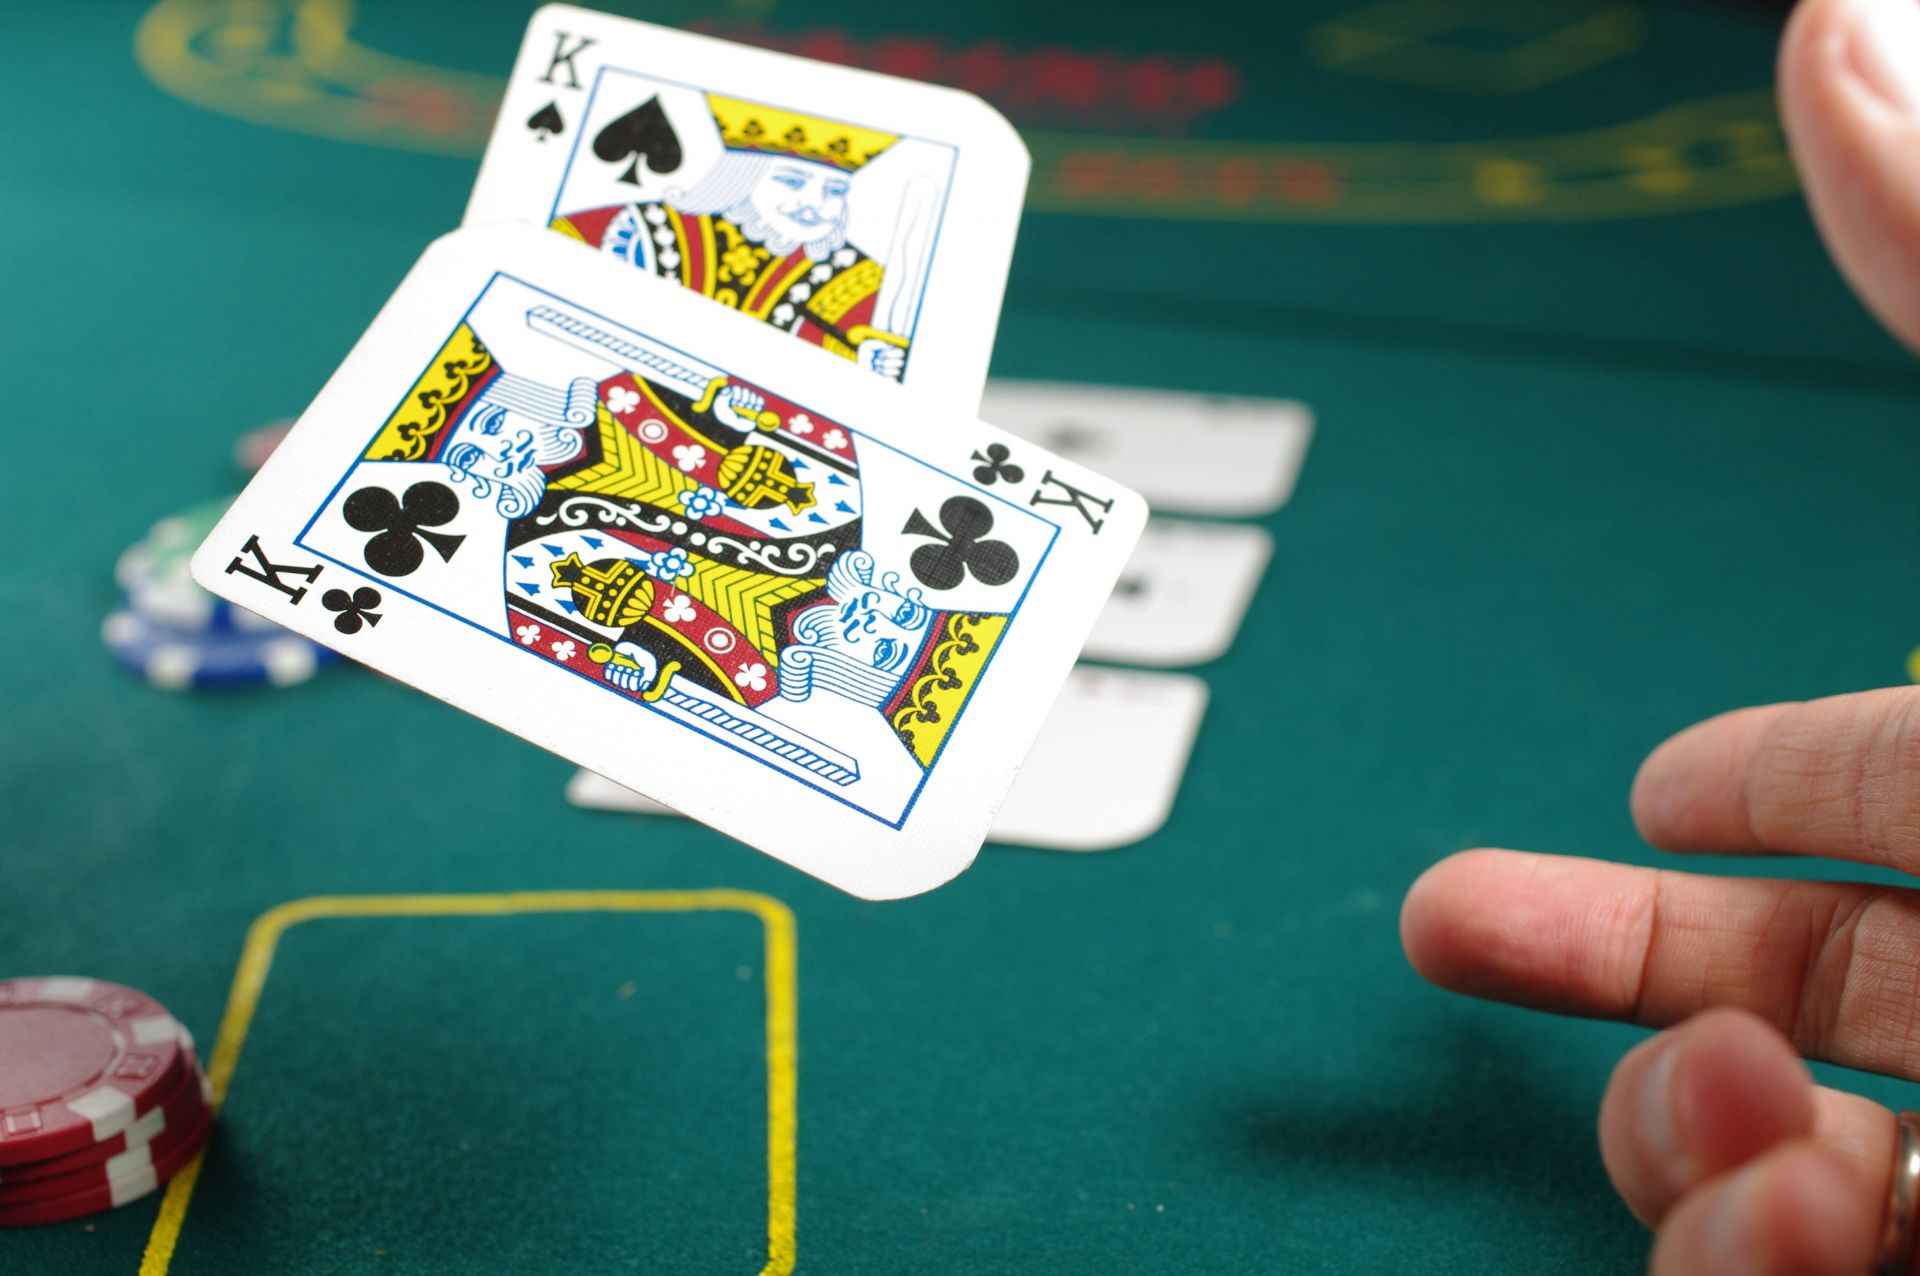 Fun88｜Recommended online casino, full guarantee for casino games, rejecting black web fraud